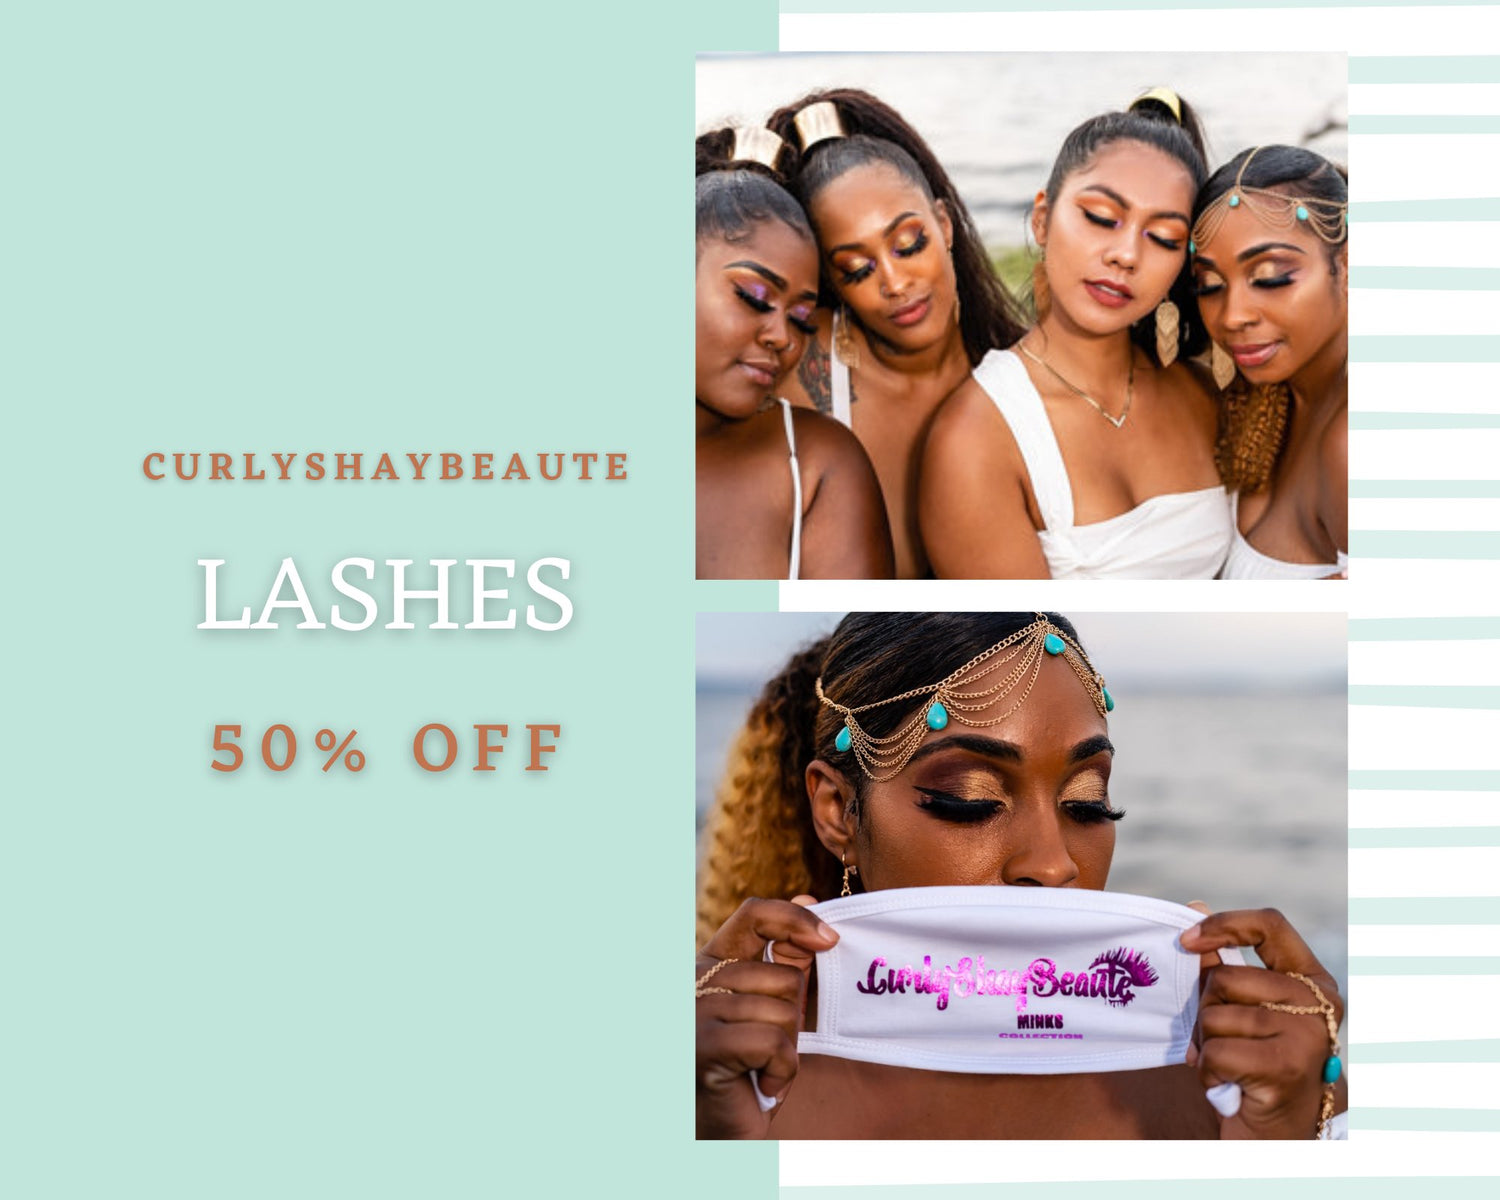 SHOP ALL LASHES